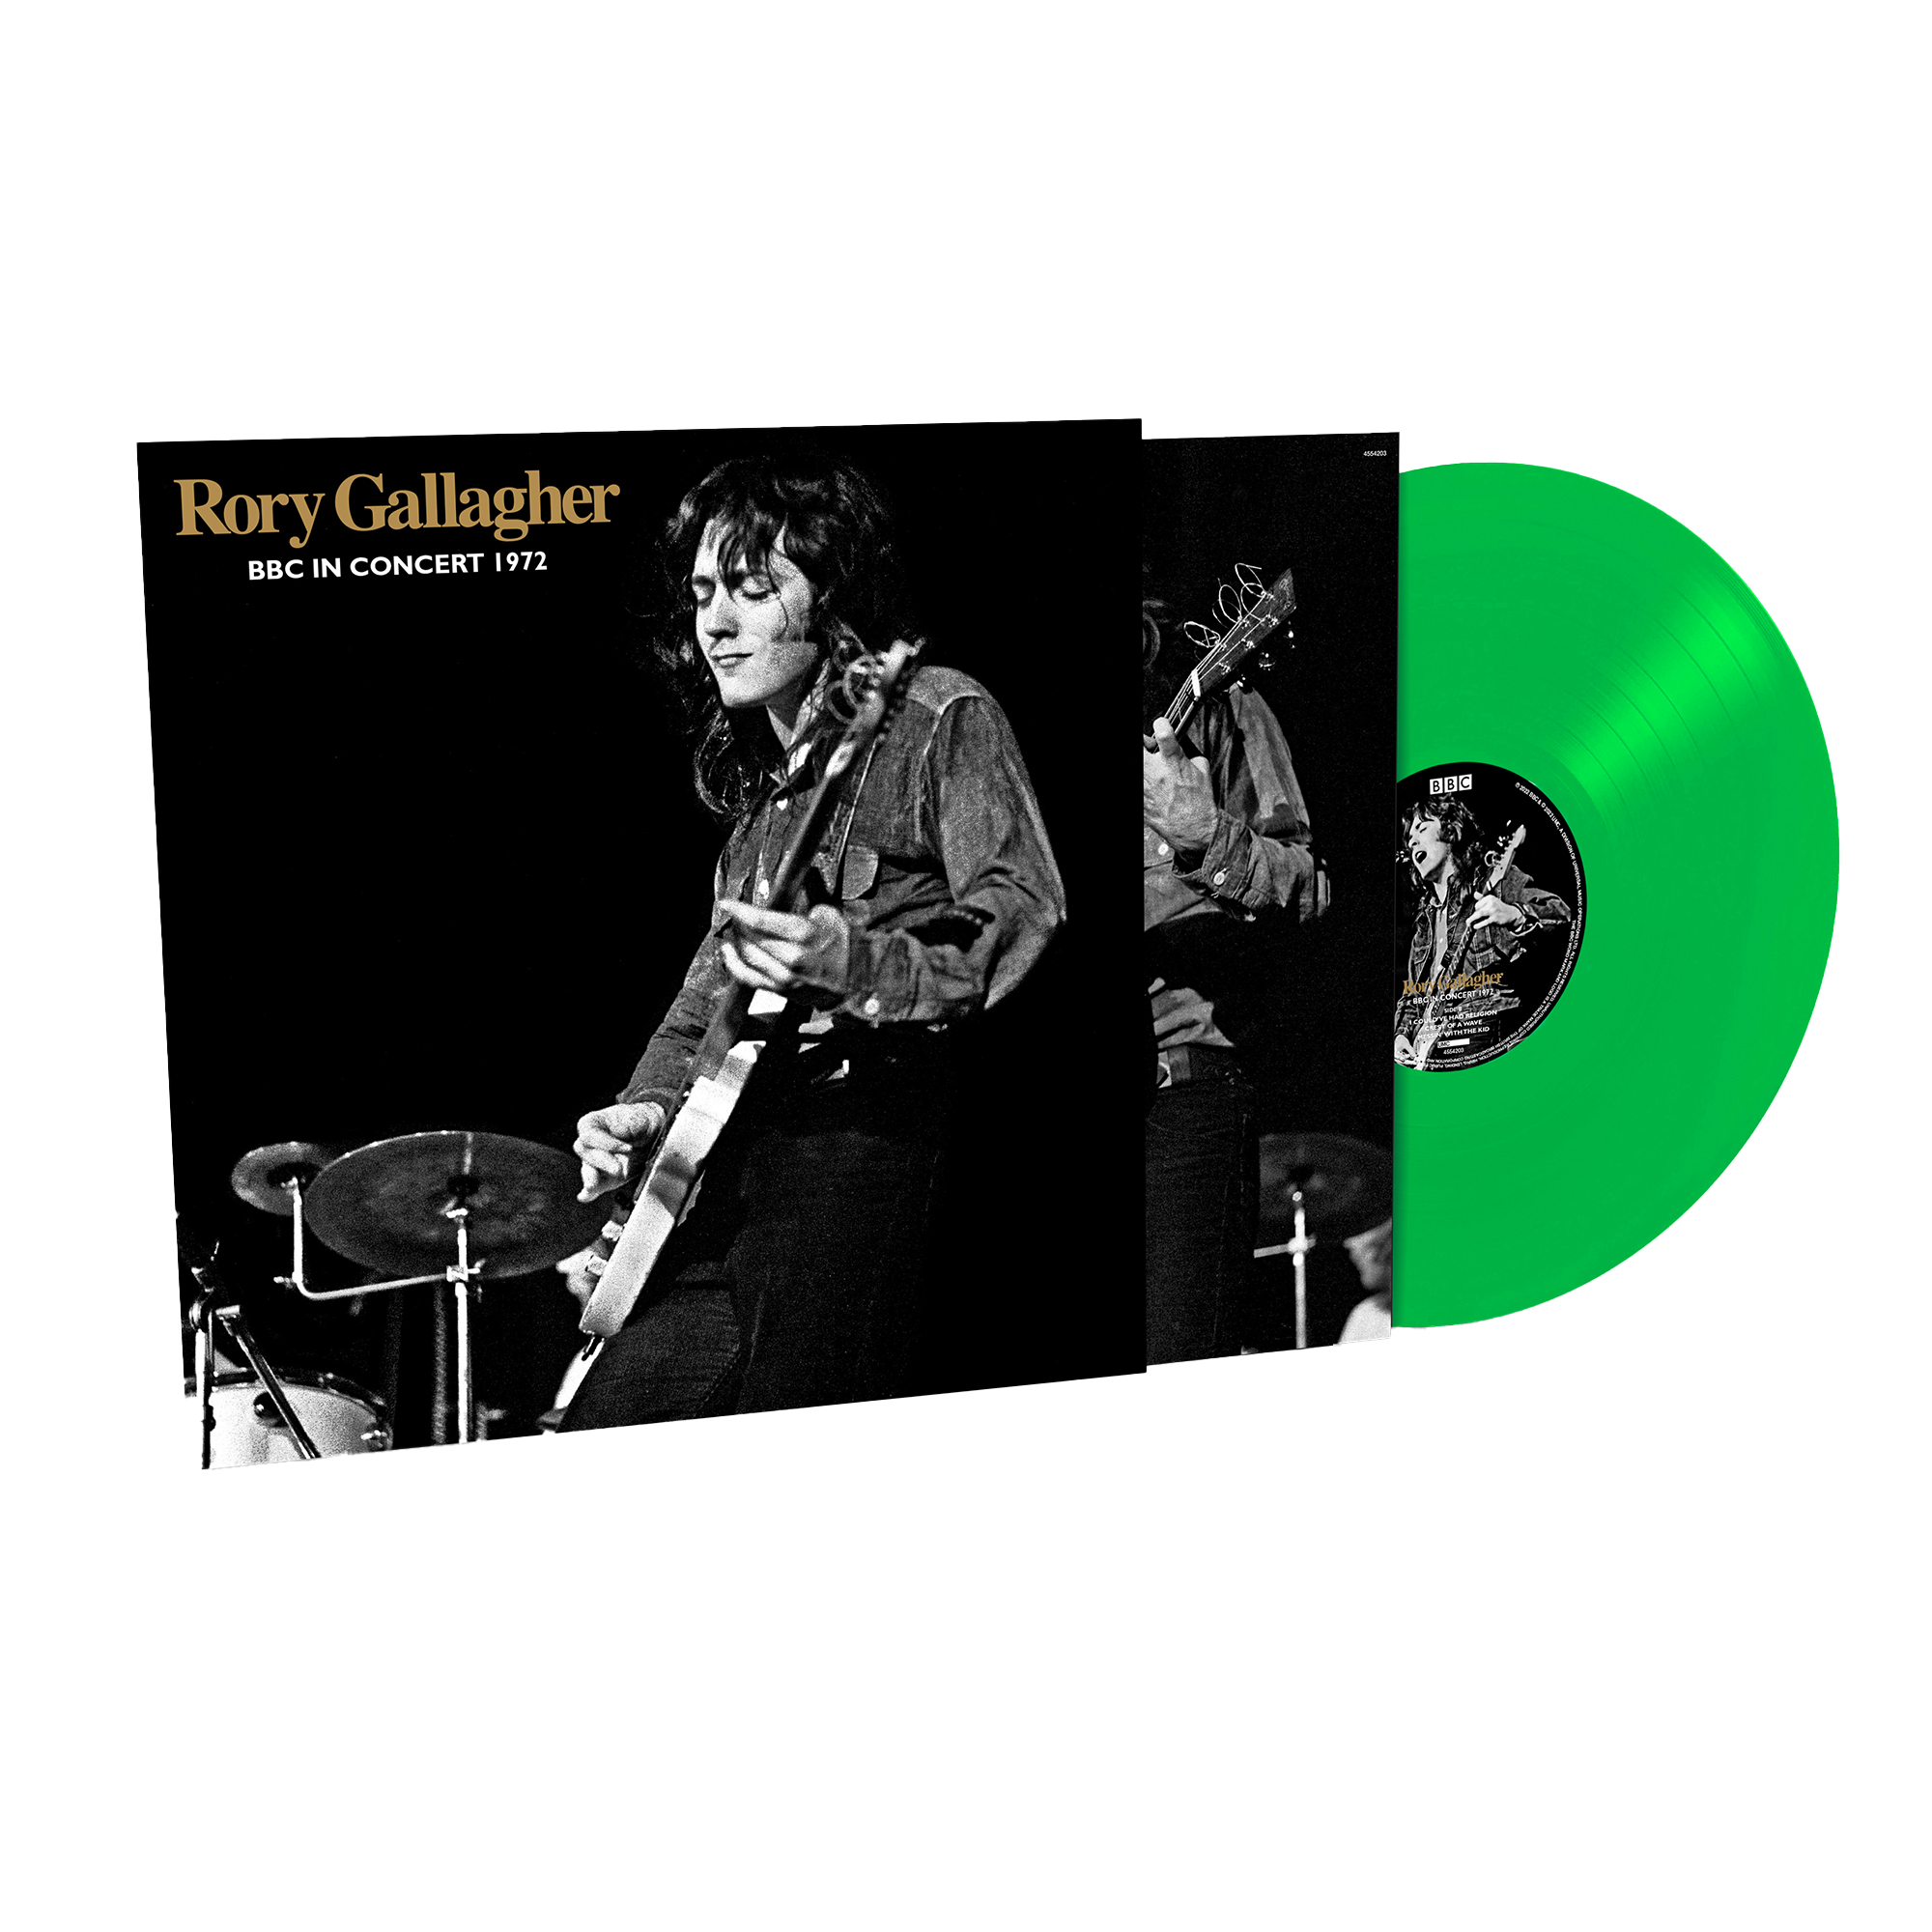 Rory Gallagher - BBC In Concert 1972: Exclusive Green Vinyl LP